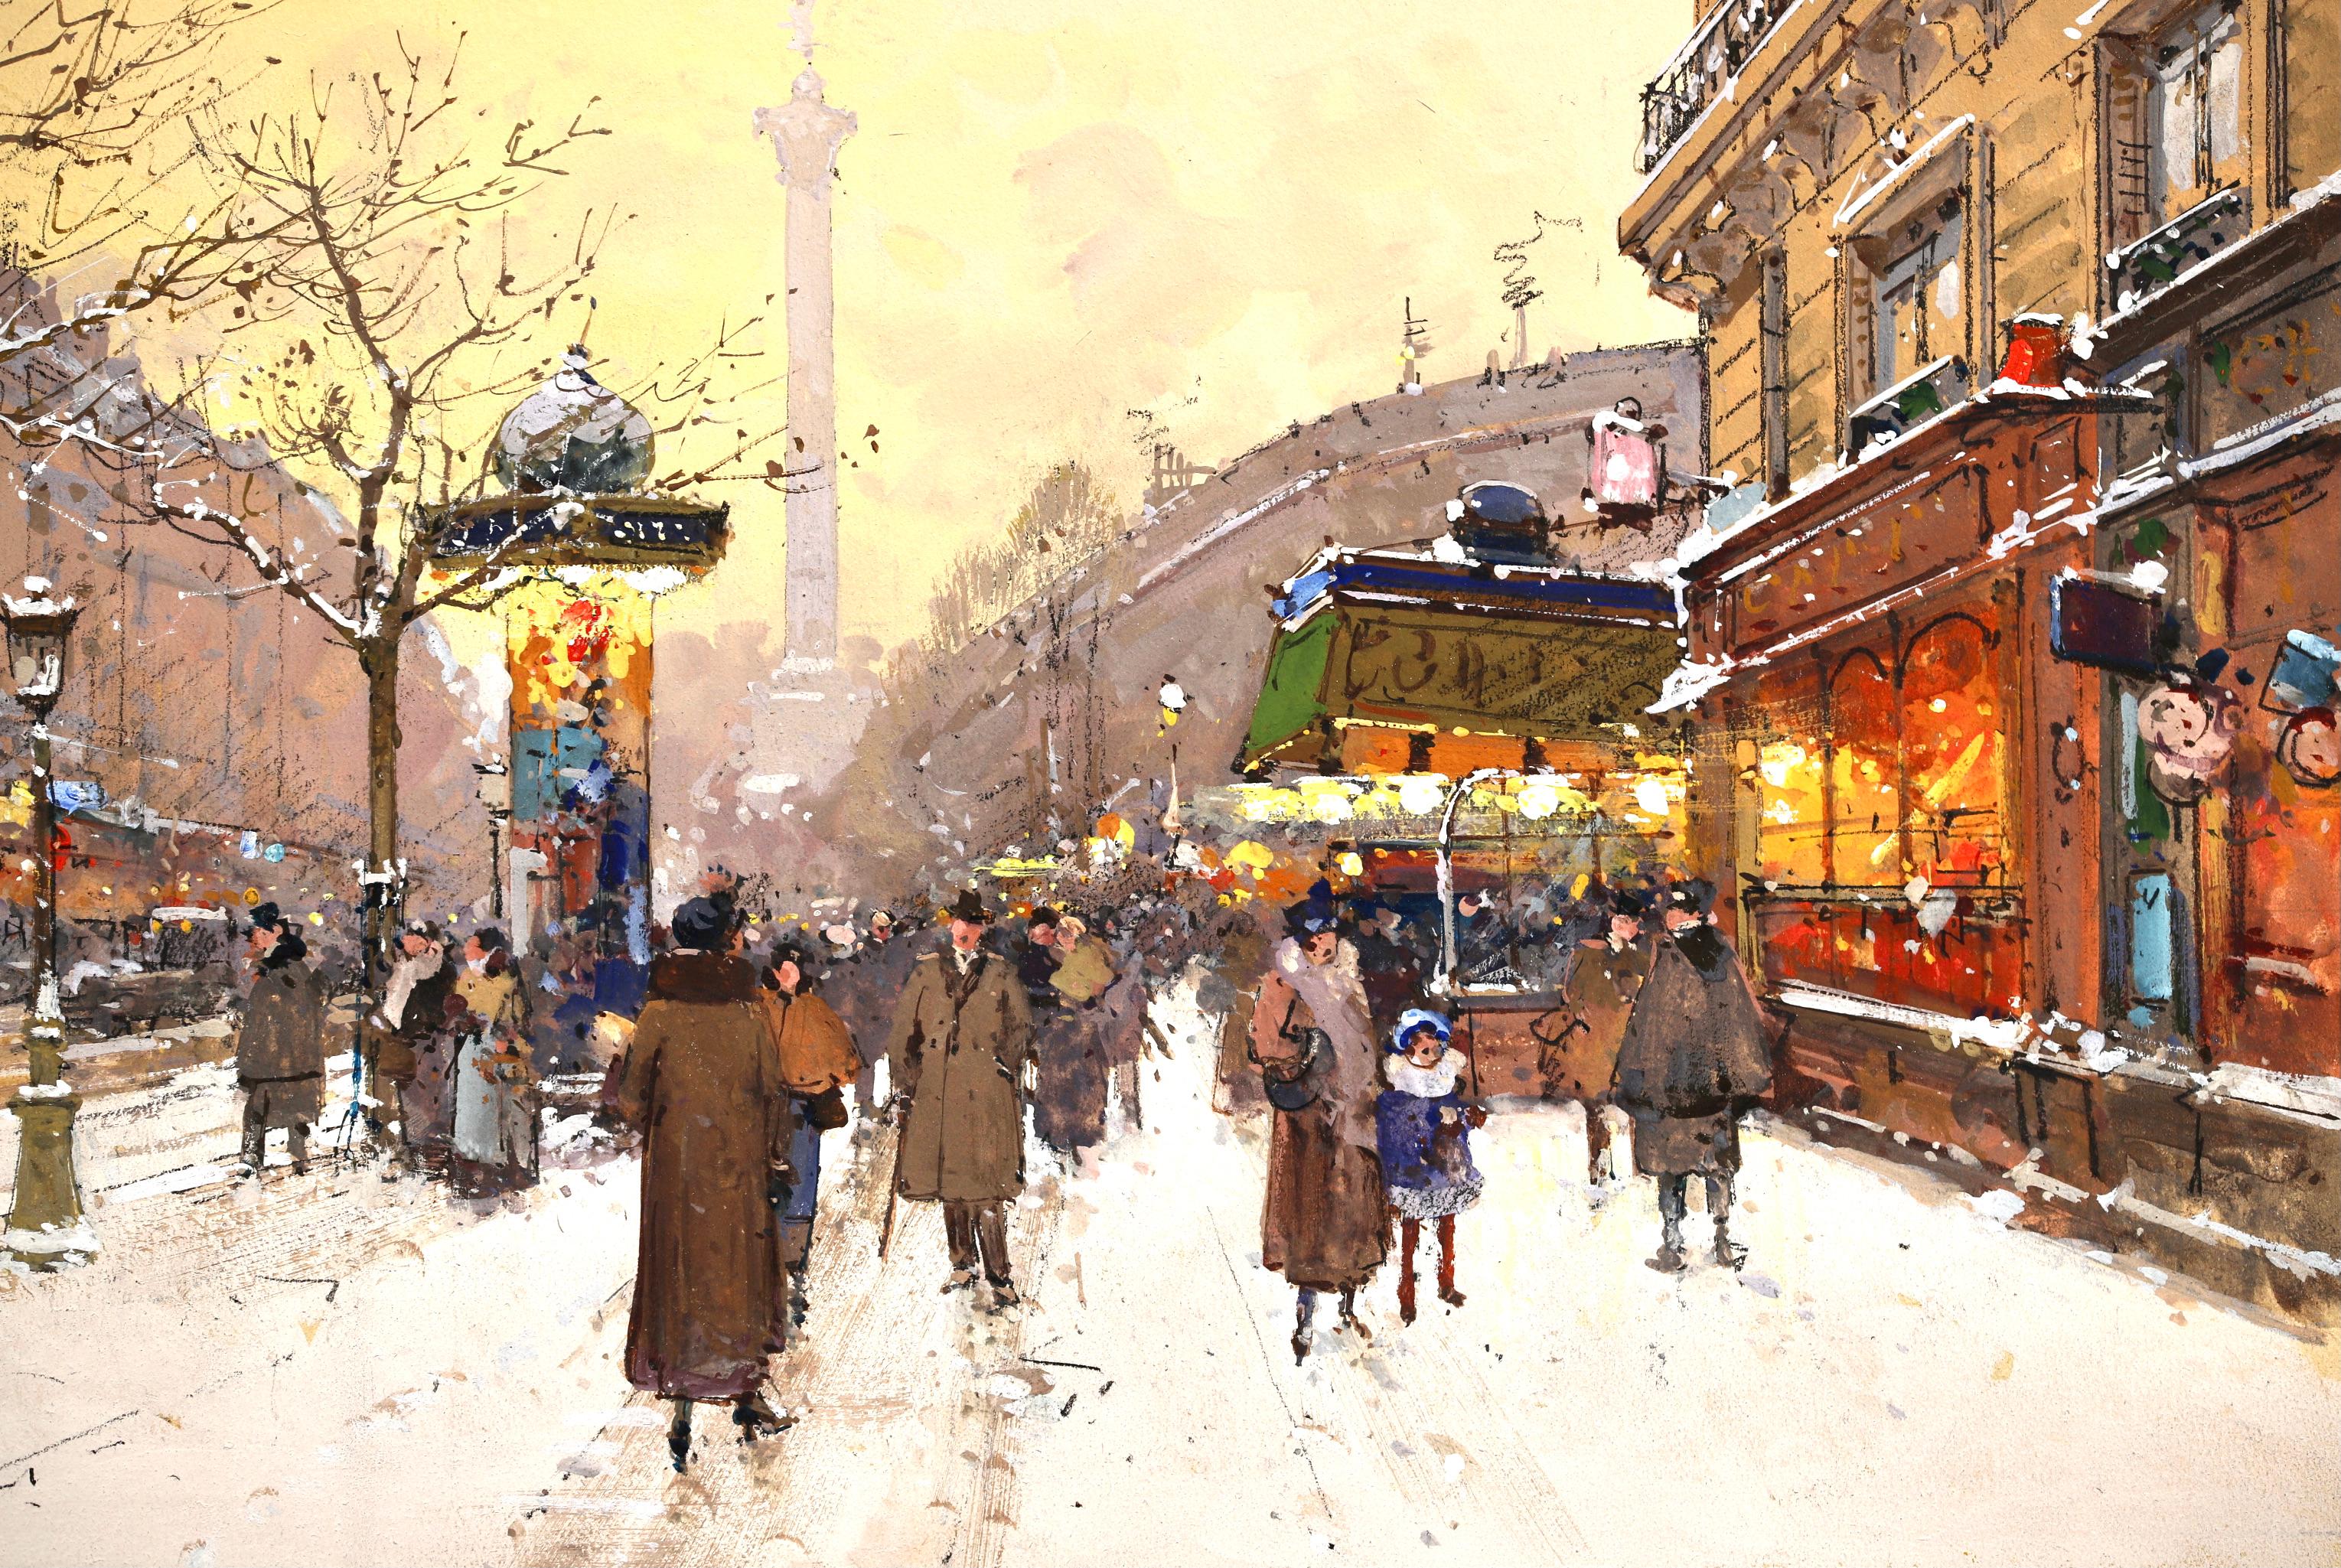 Signed impressionist gouache on board circa 1890 by sought after French painter Eugene Galien-Laloue. The piece depicts a depicting a bustling city scene at the Place de Bastille in Paris. Snow lays thick on the ground and on the buildings and